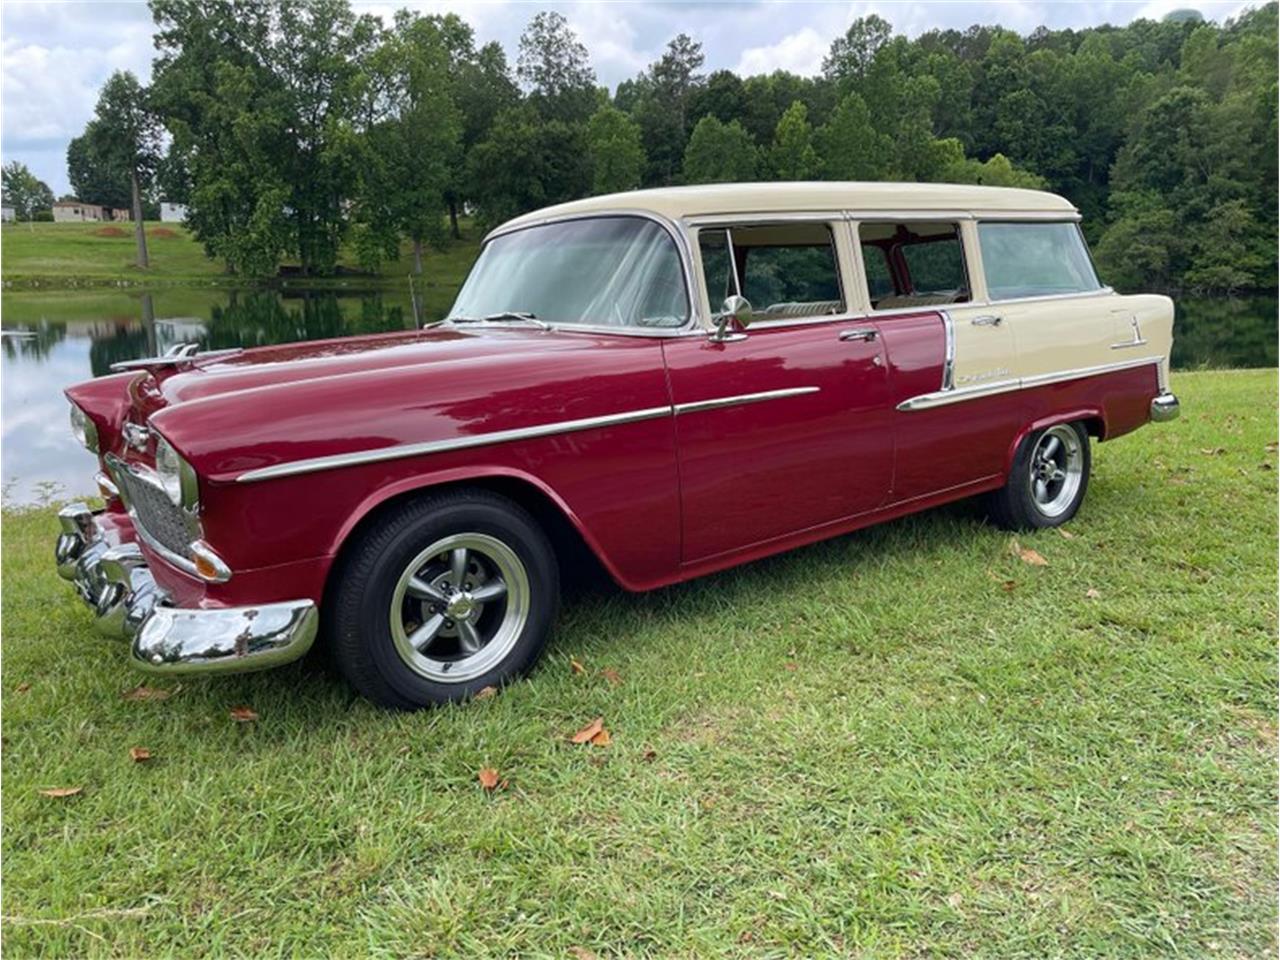 For Sale at Auction: 1955 Chevrolet 210 in Greensboro, North Carolina for sale in Greensboro, NC